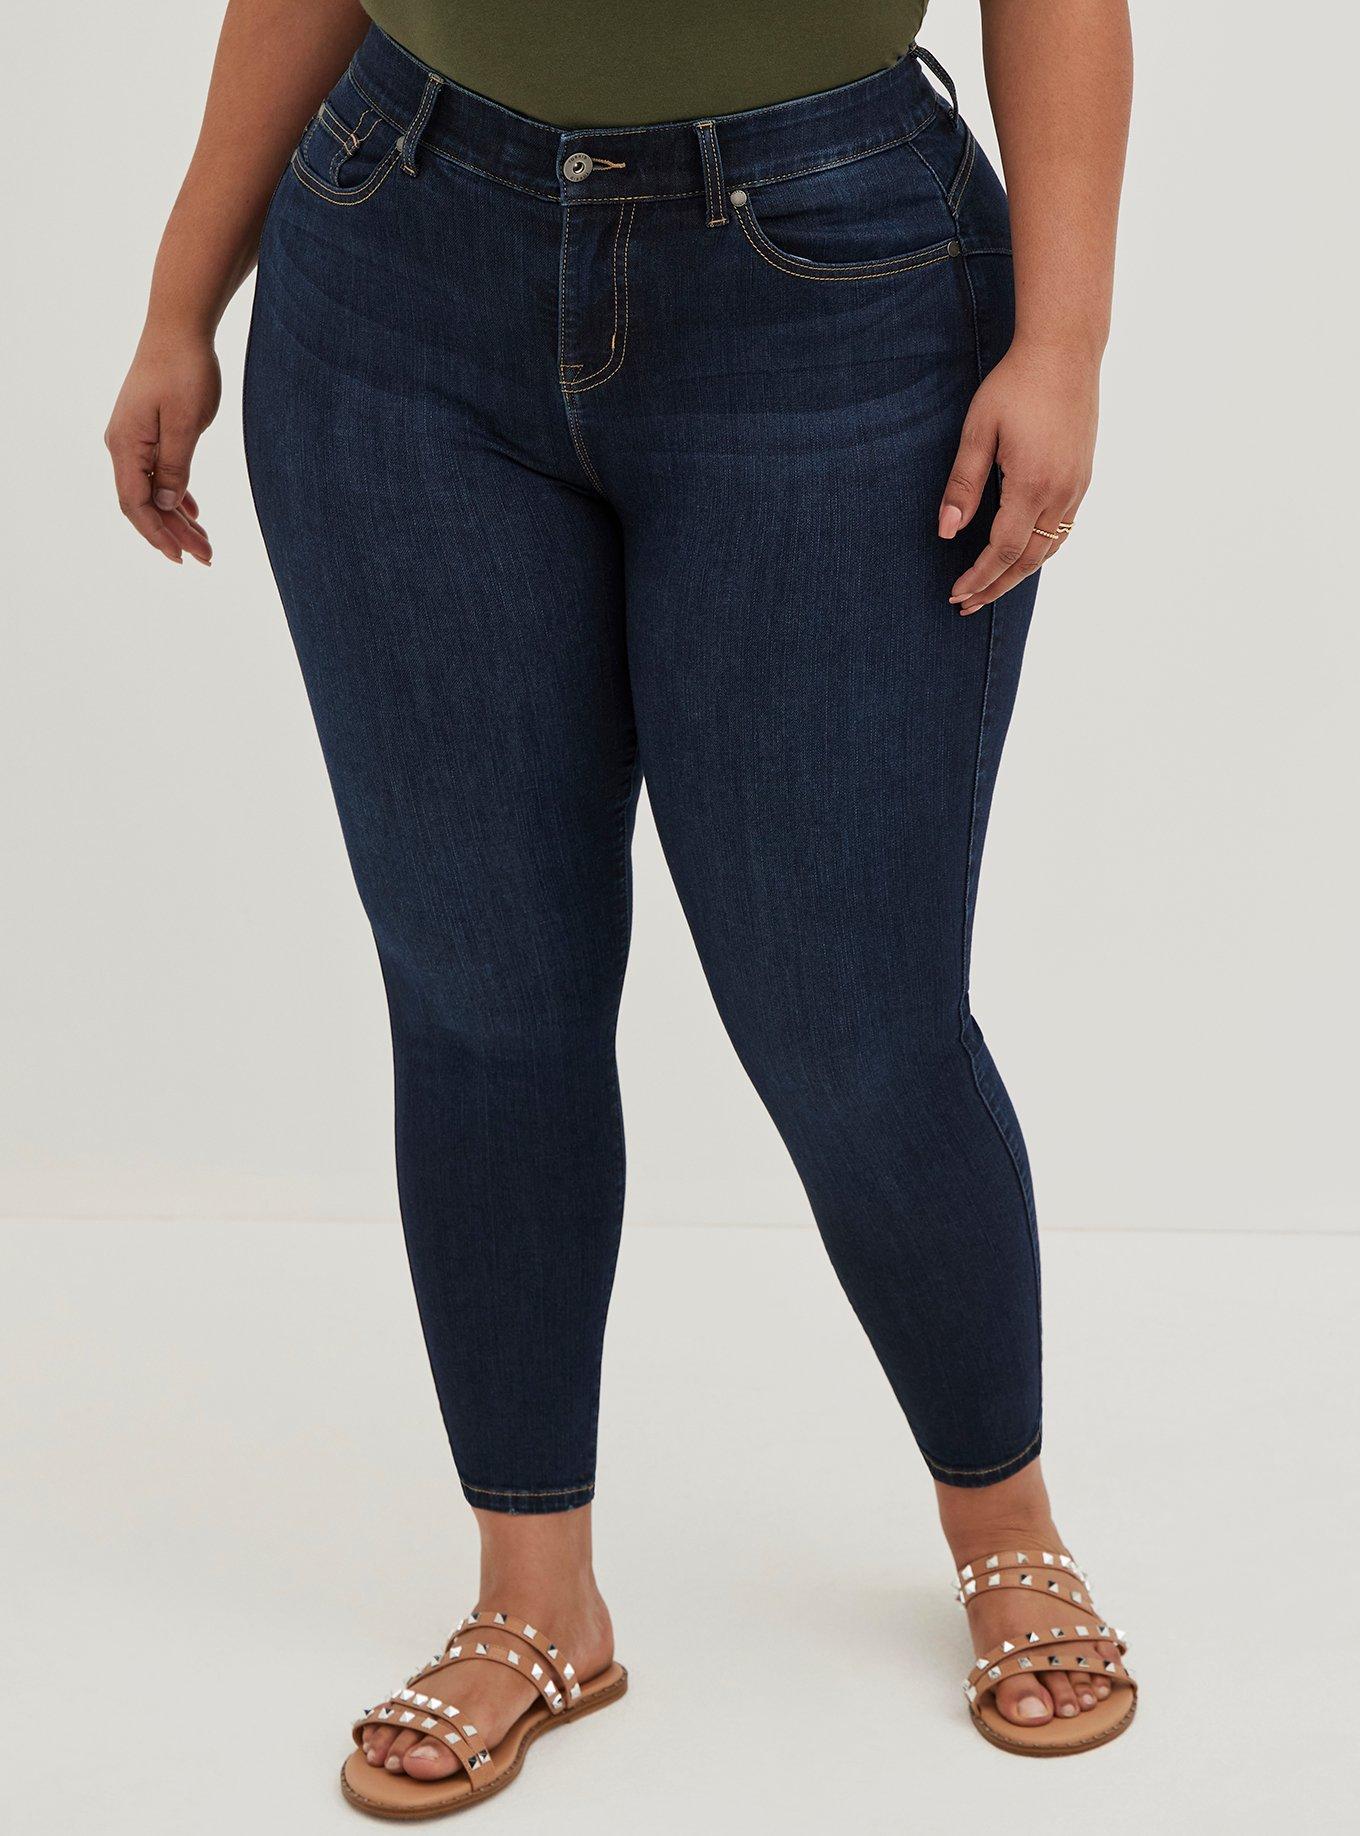 fitting-in-fail-jeans-fupa